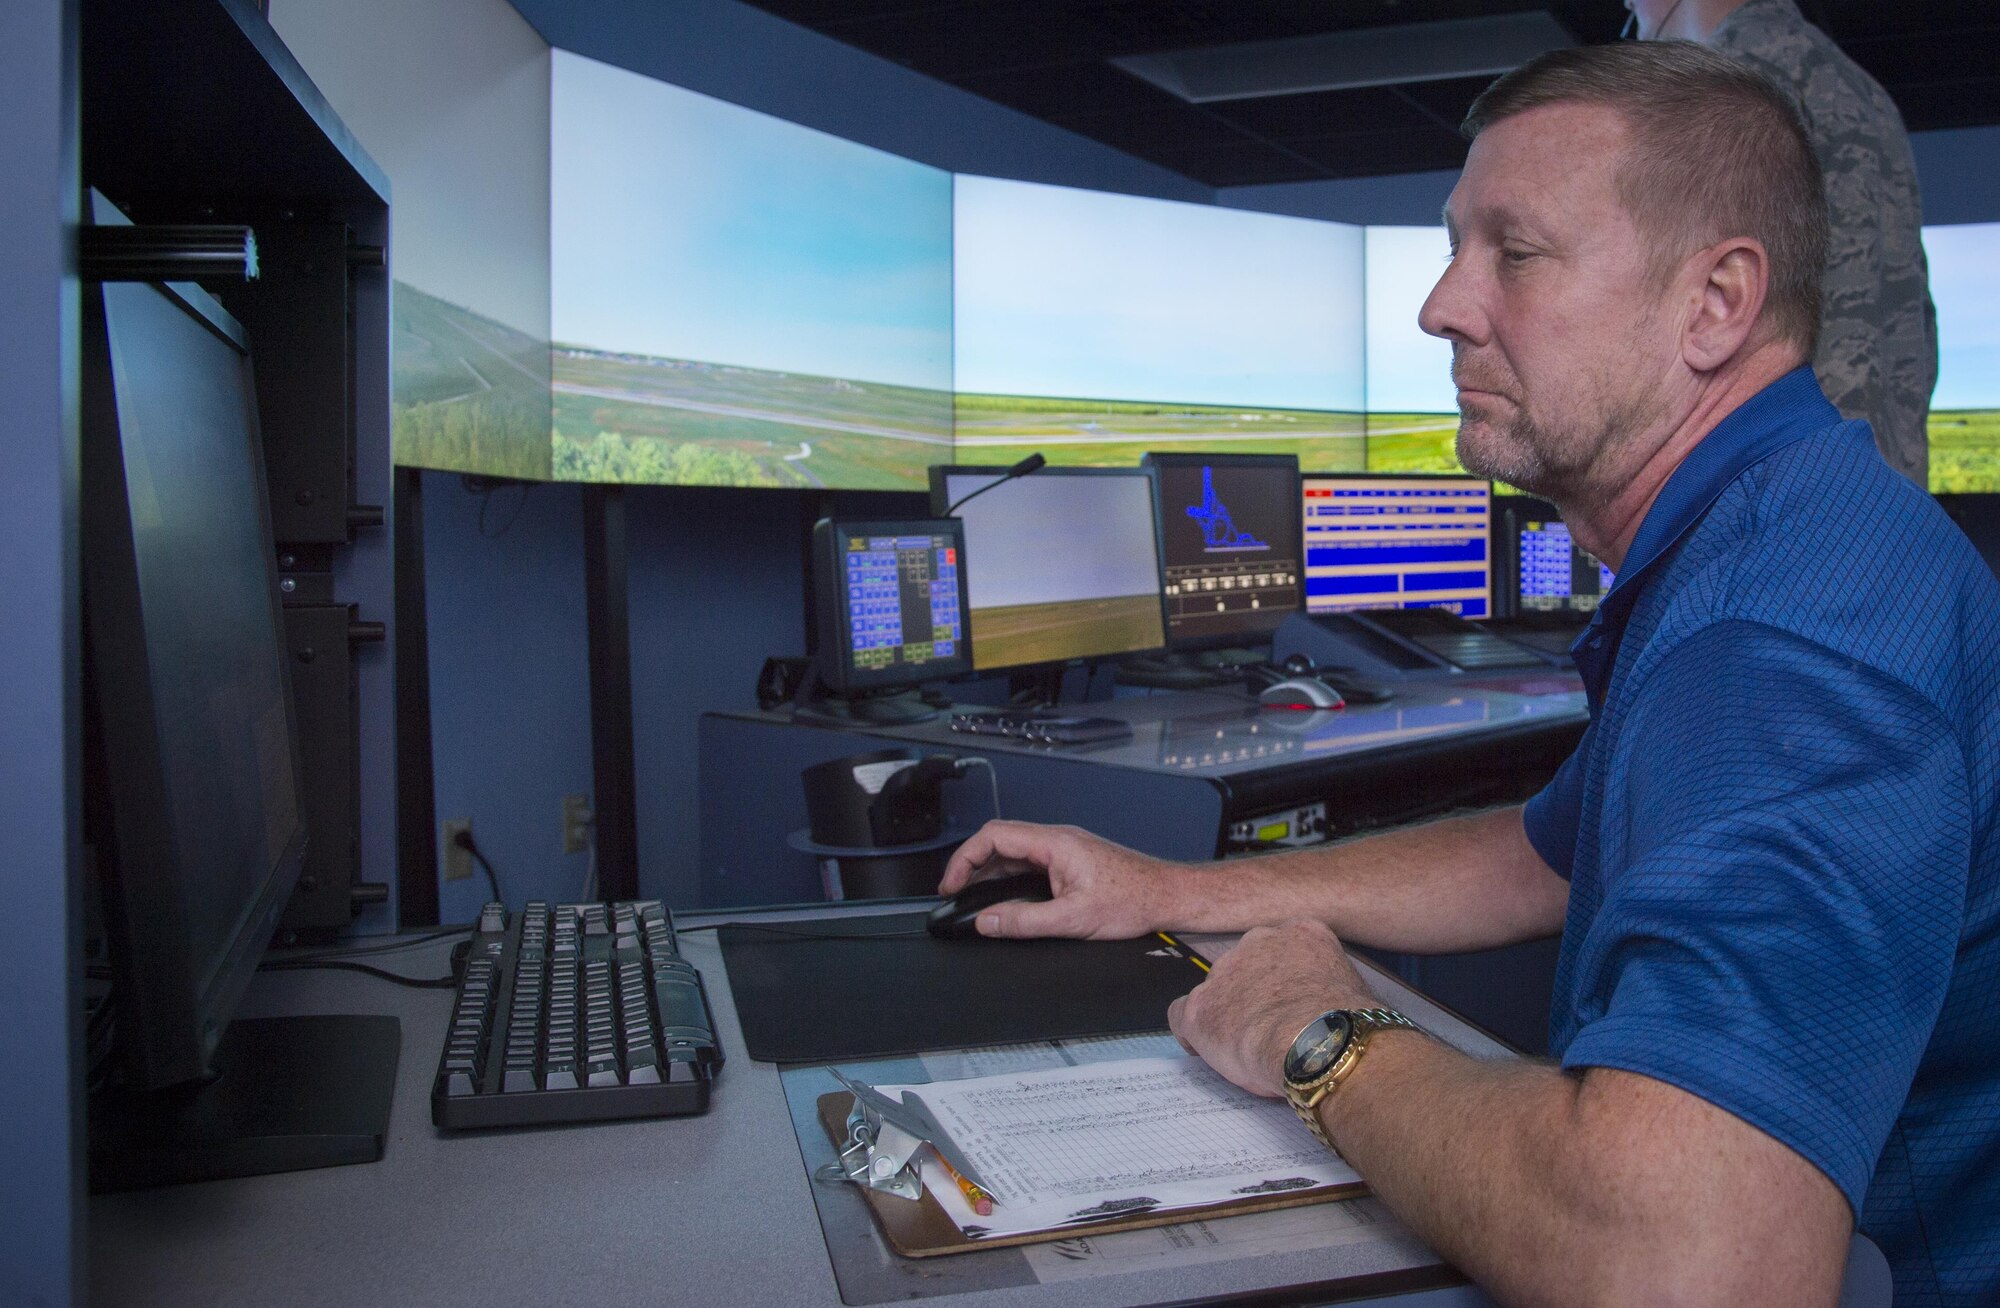 Bruce Morrow, a supervisor air traffic control specialist and the air traffic control simulation equipment program manager assigned to the 6th Operations Support Squadron, controls an air traffic control simulator as Airmen train through a scenario at MacDill Air Force Base, Fla., Oct. 27, 2017. Controllers can customize scenarios for individuals to help teach them a particular concept or skill. (U.S. Air Force photo by Senior Airman Mariette Adams)